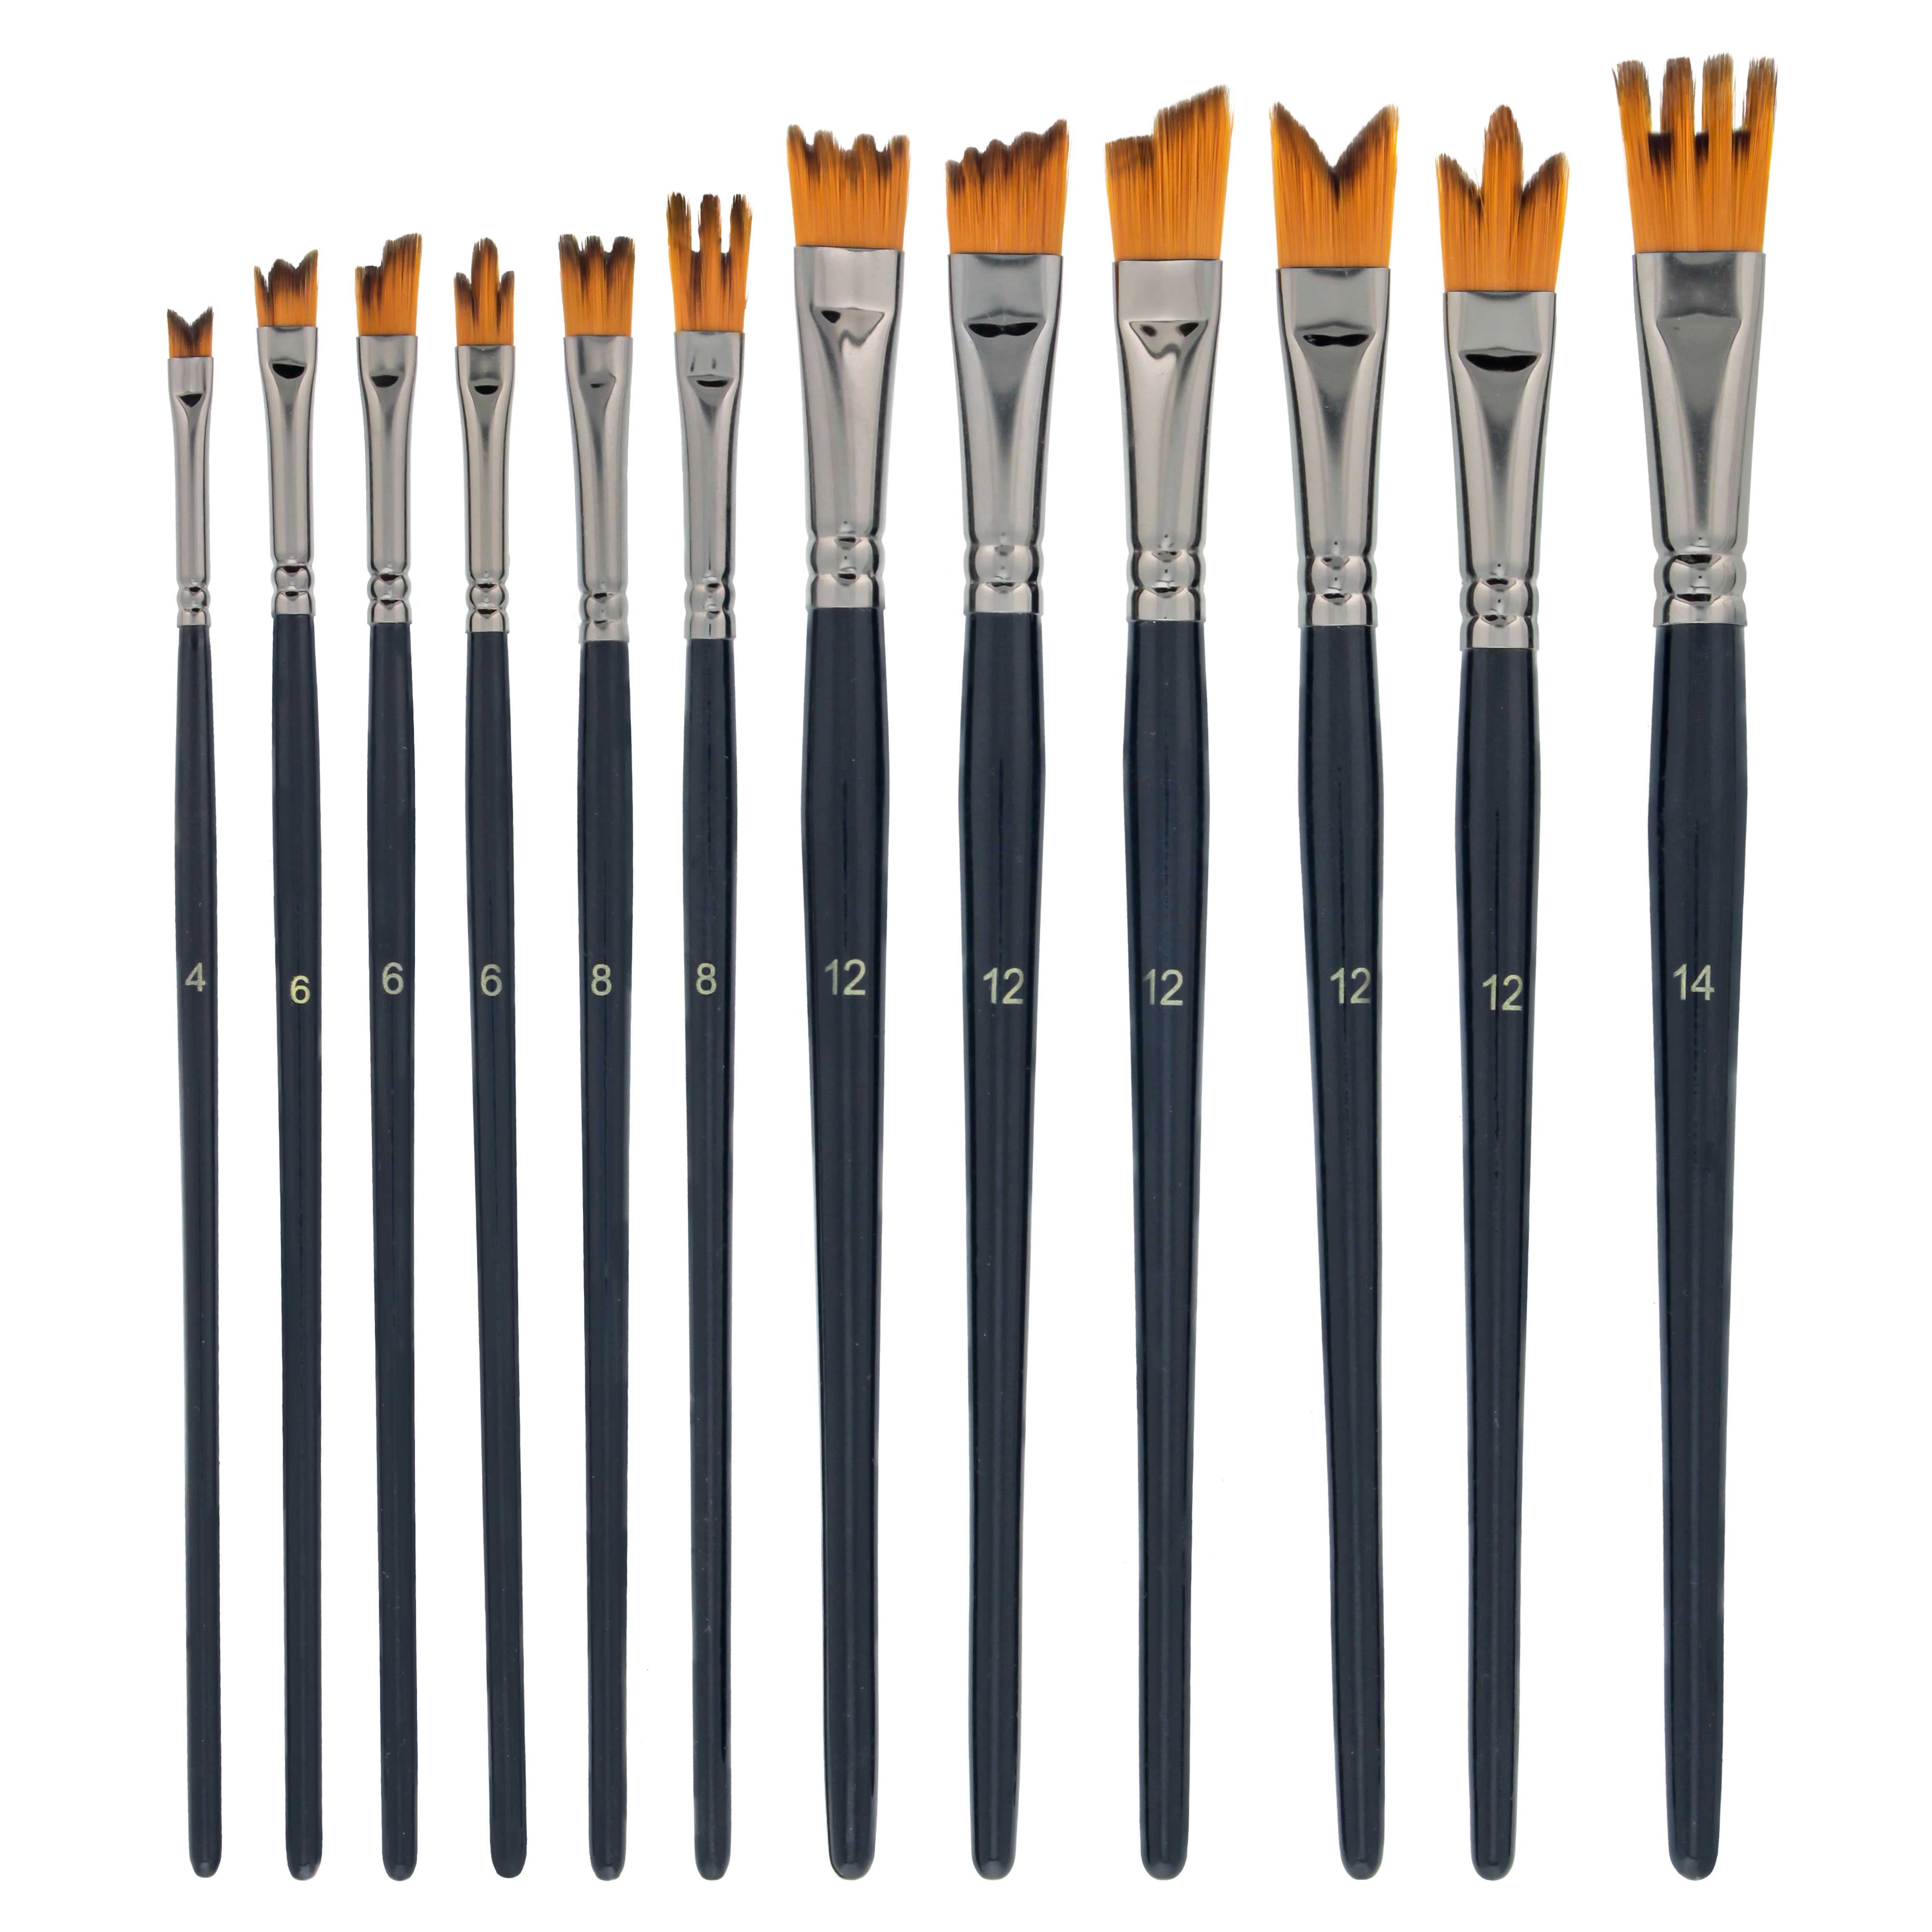 School Smart Young Artist Paint Brushes, Assorted Sizes, Set of 36